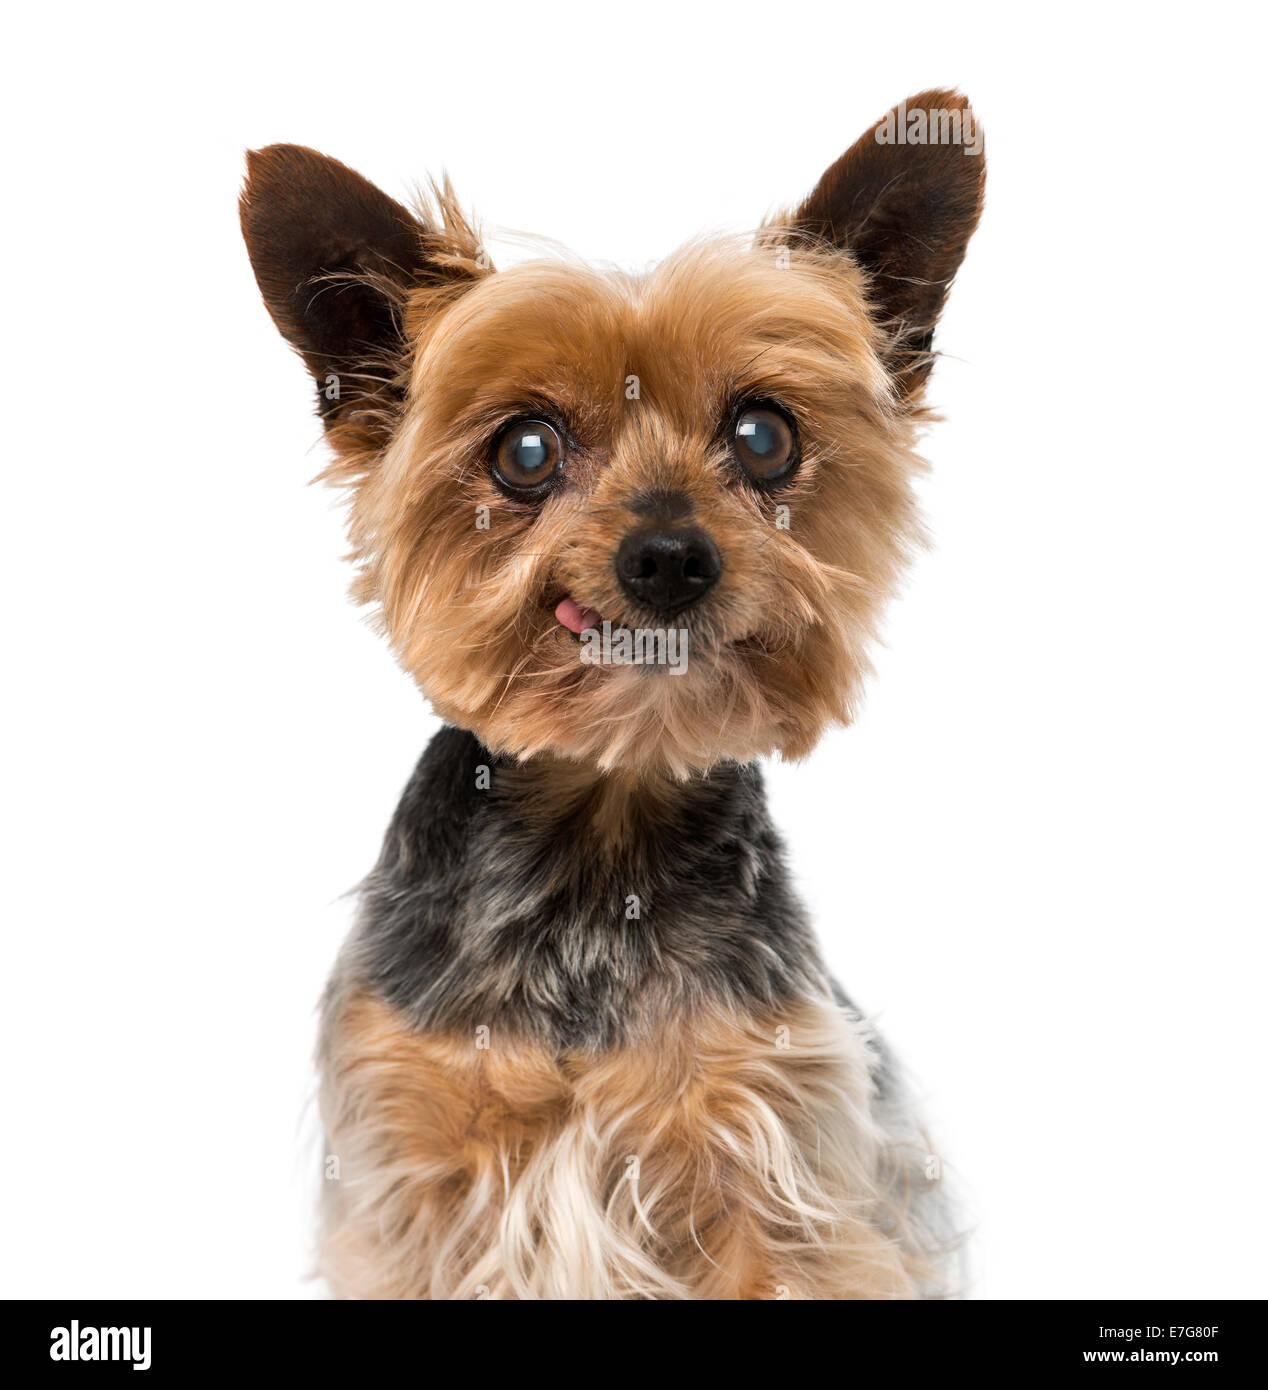 Old Yorkshire terrier (13 years old) against white background Stock Photo